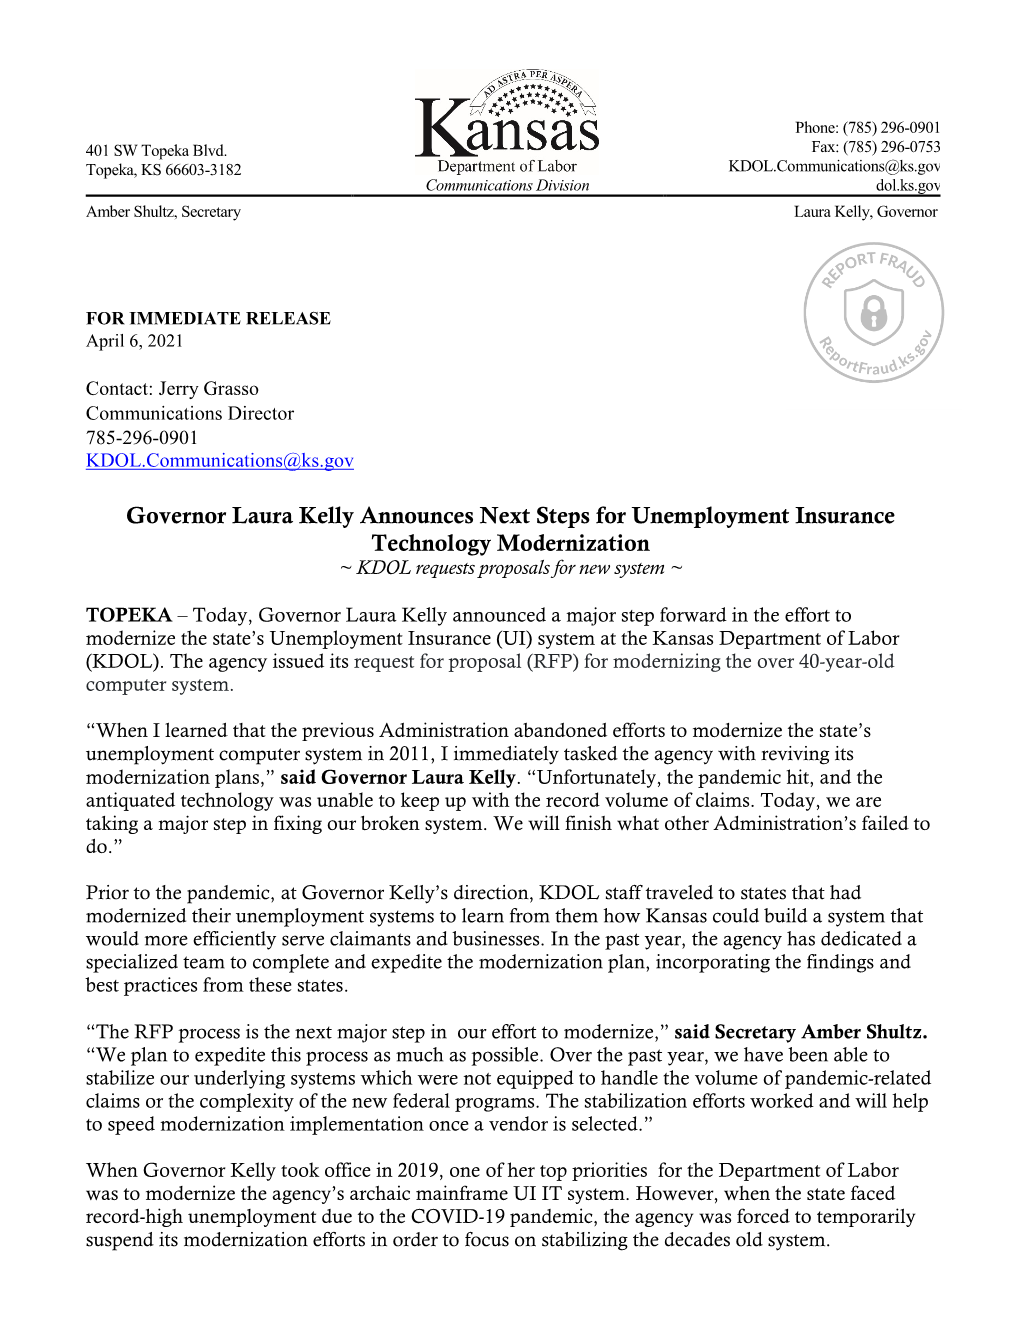 Governor Laura Kelly Announces Next Steps for Unemployment Insurance Technology Modernization ~ KDOL Requests Proposals for New System ~